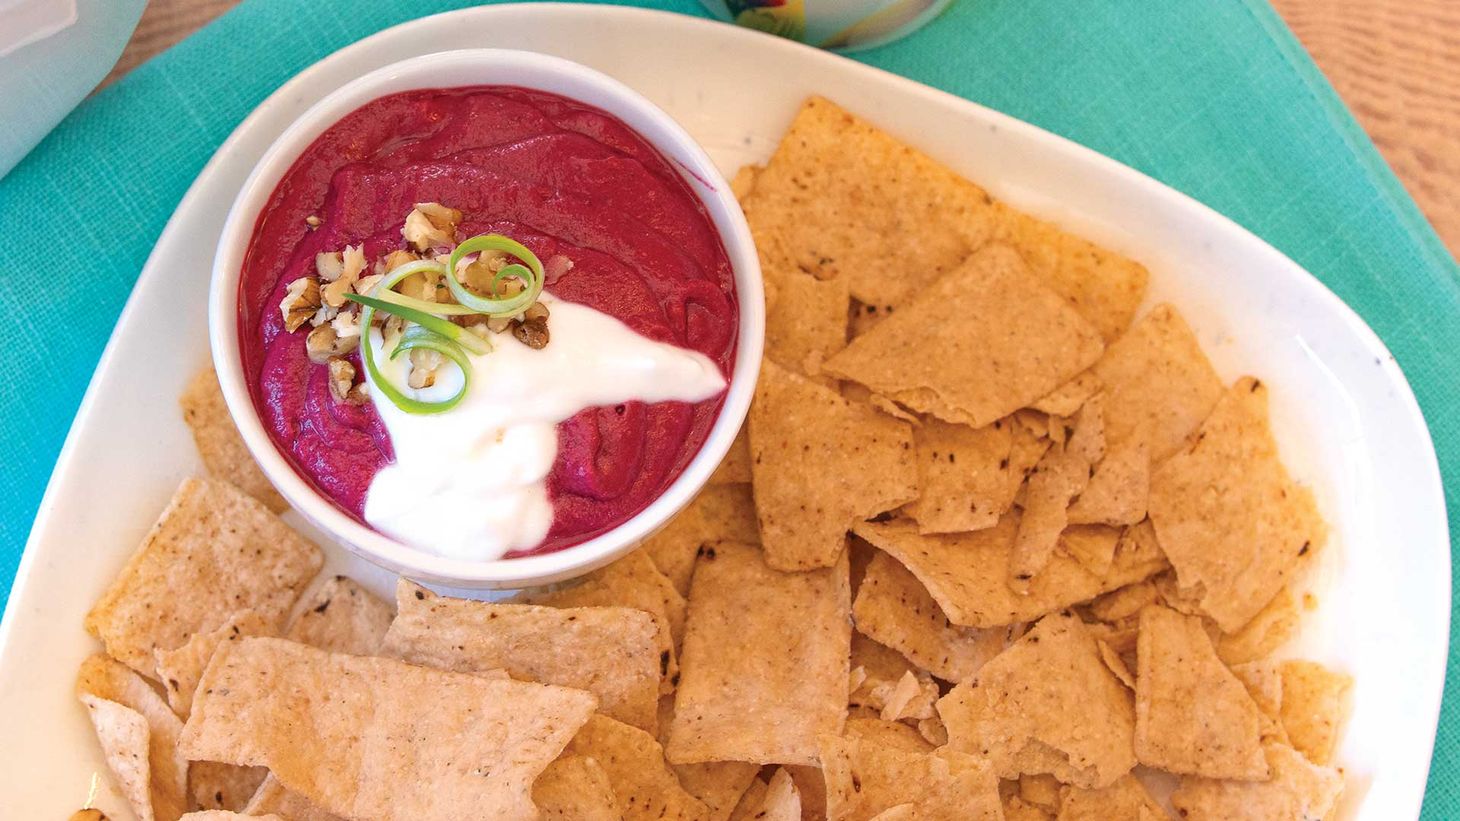 Beetroot dip with walnut and date